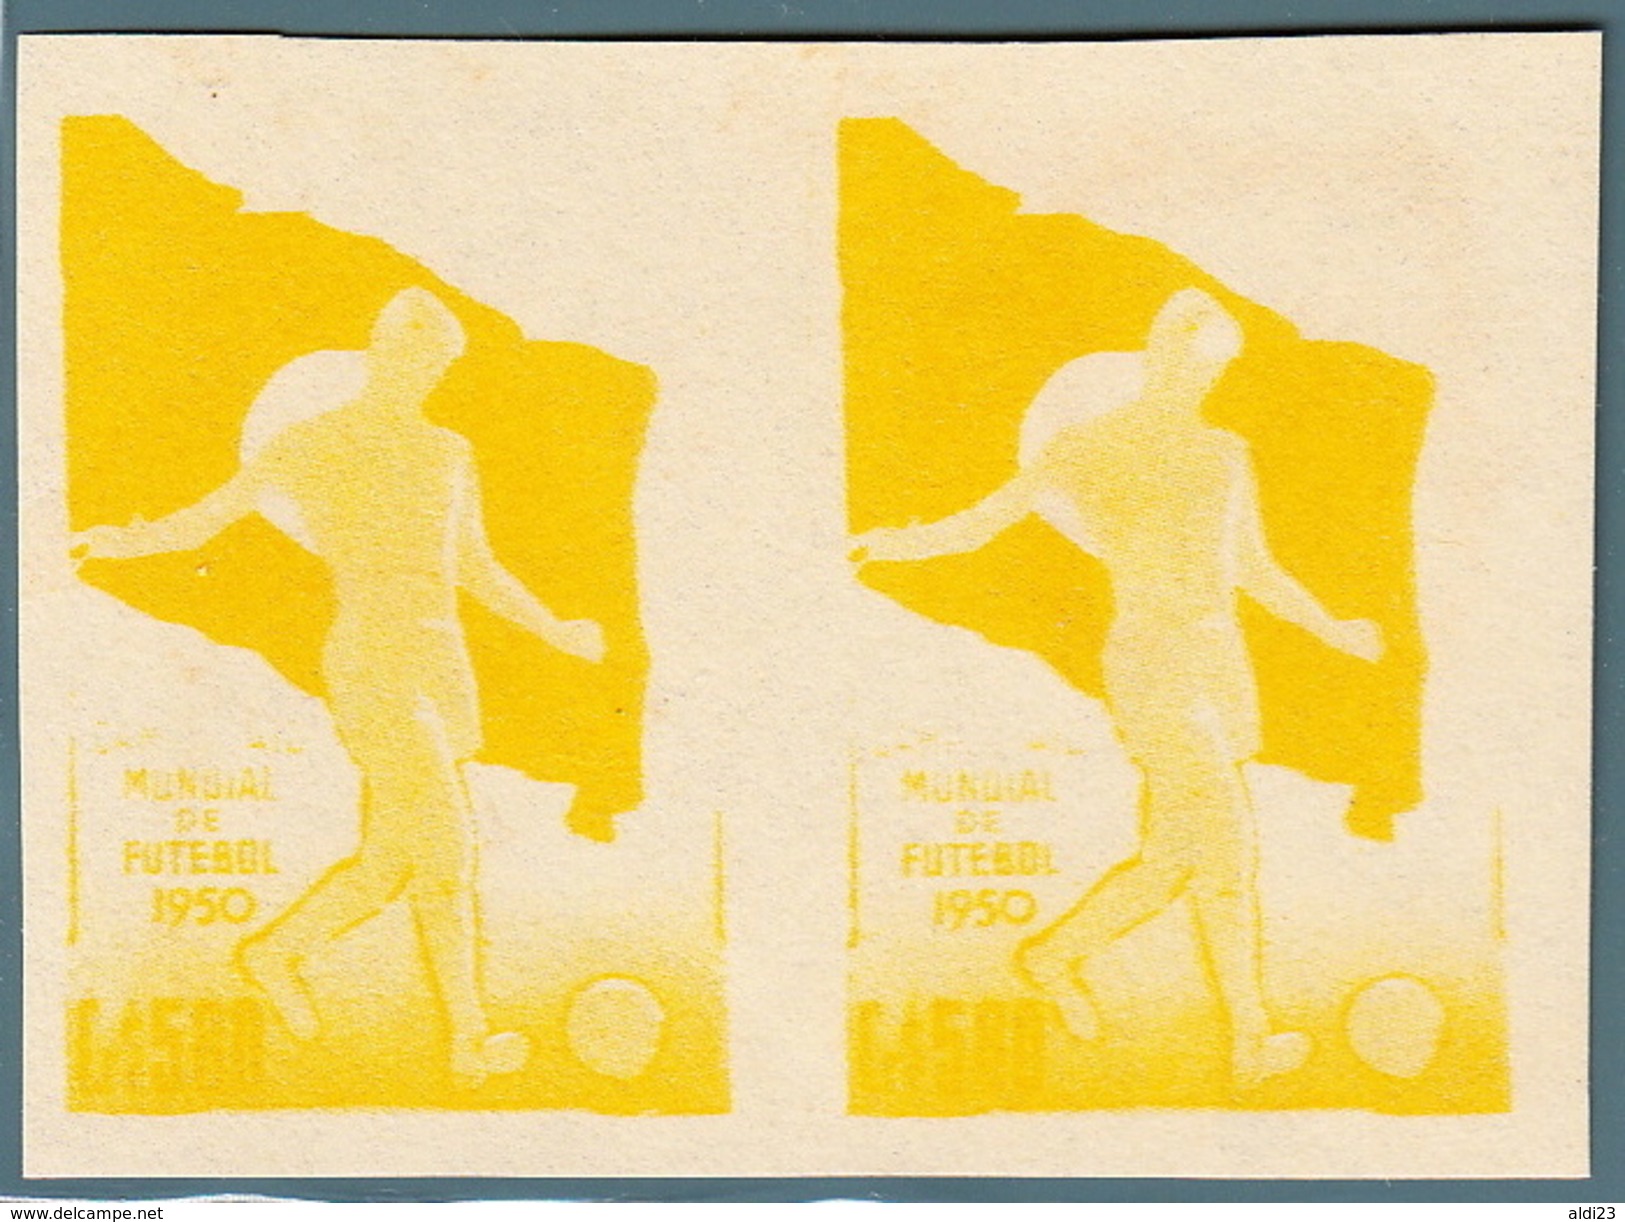 Rare Stamps Of World Cup Soccer Uruguay 1950 - Football Variety Color Brazil. - 1950 – Brazil